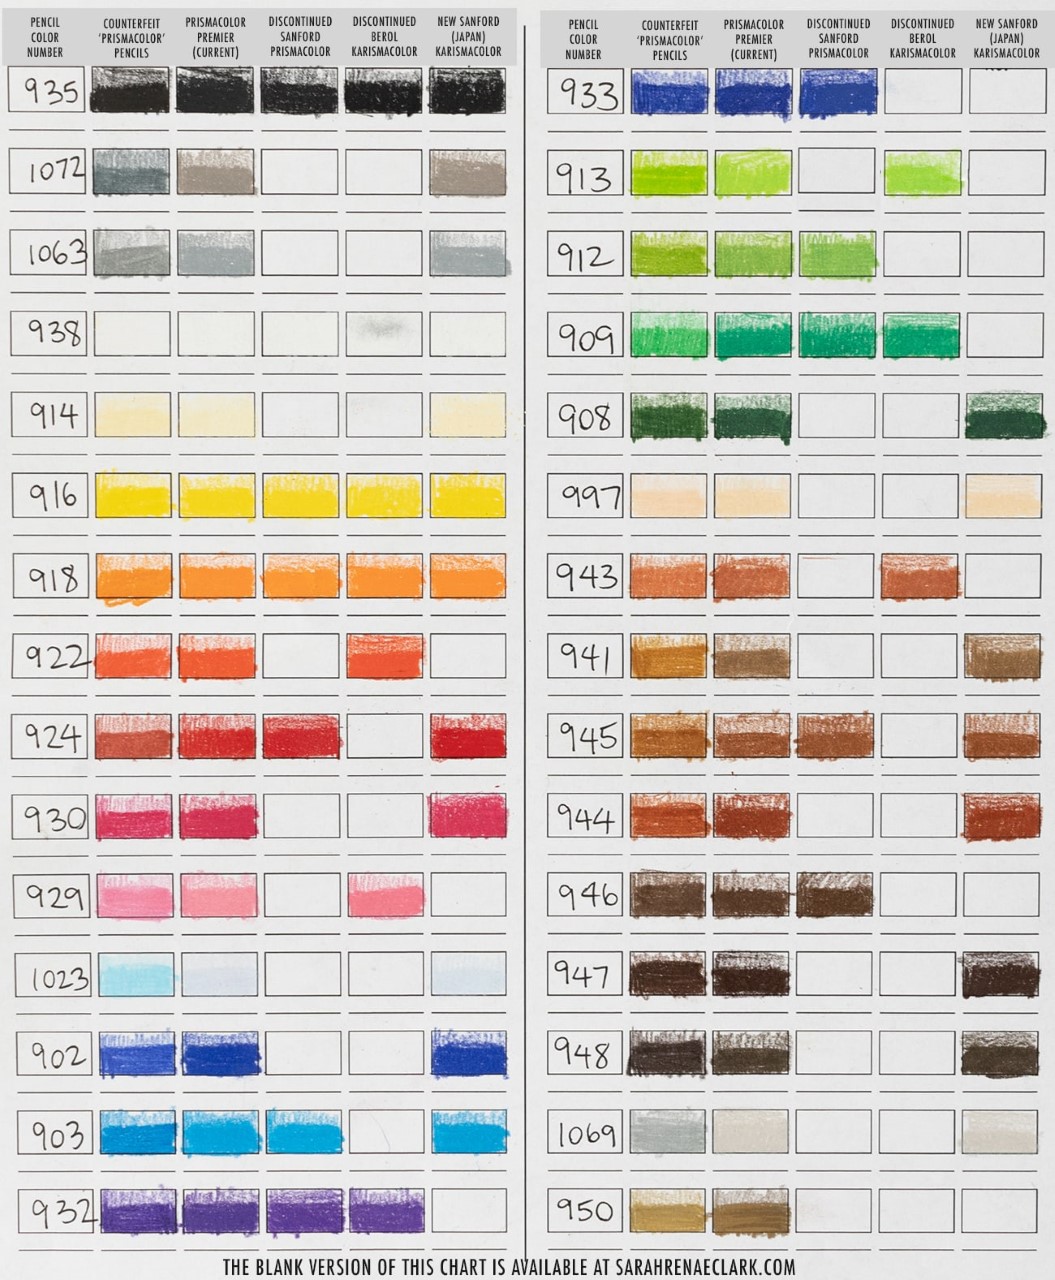 A4 Size Ready to Print Blank Reference Chart for Prismacolor Premier  Watercolor Colored Pencils Set of 36 Organized by Color 